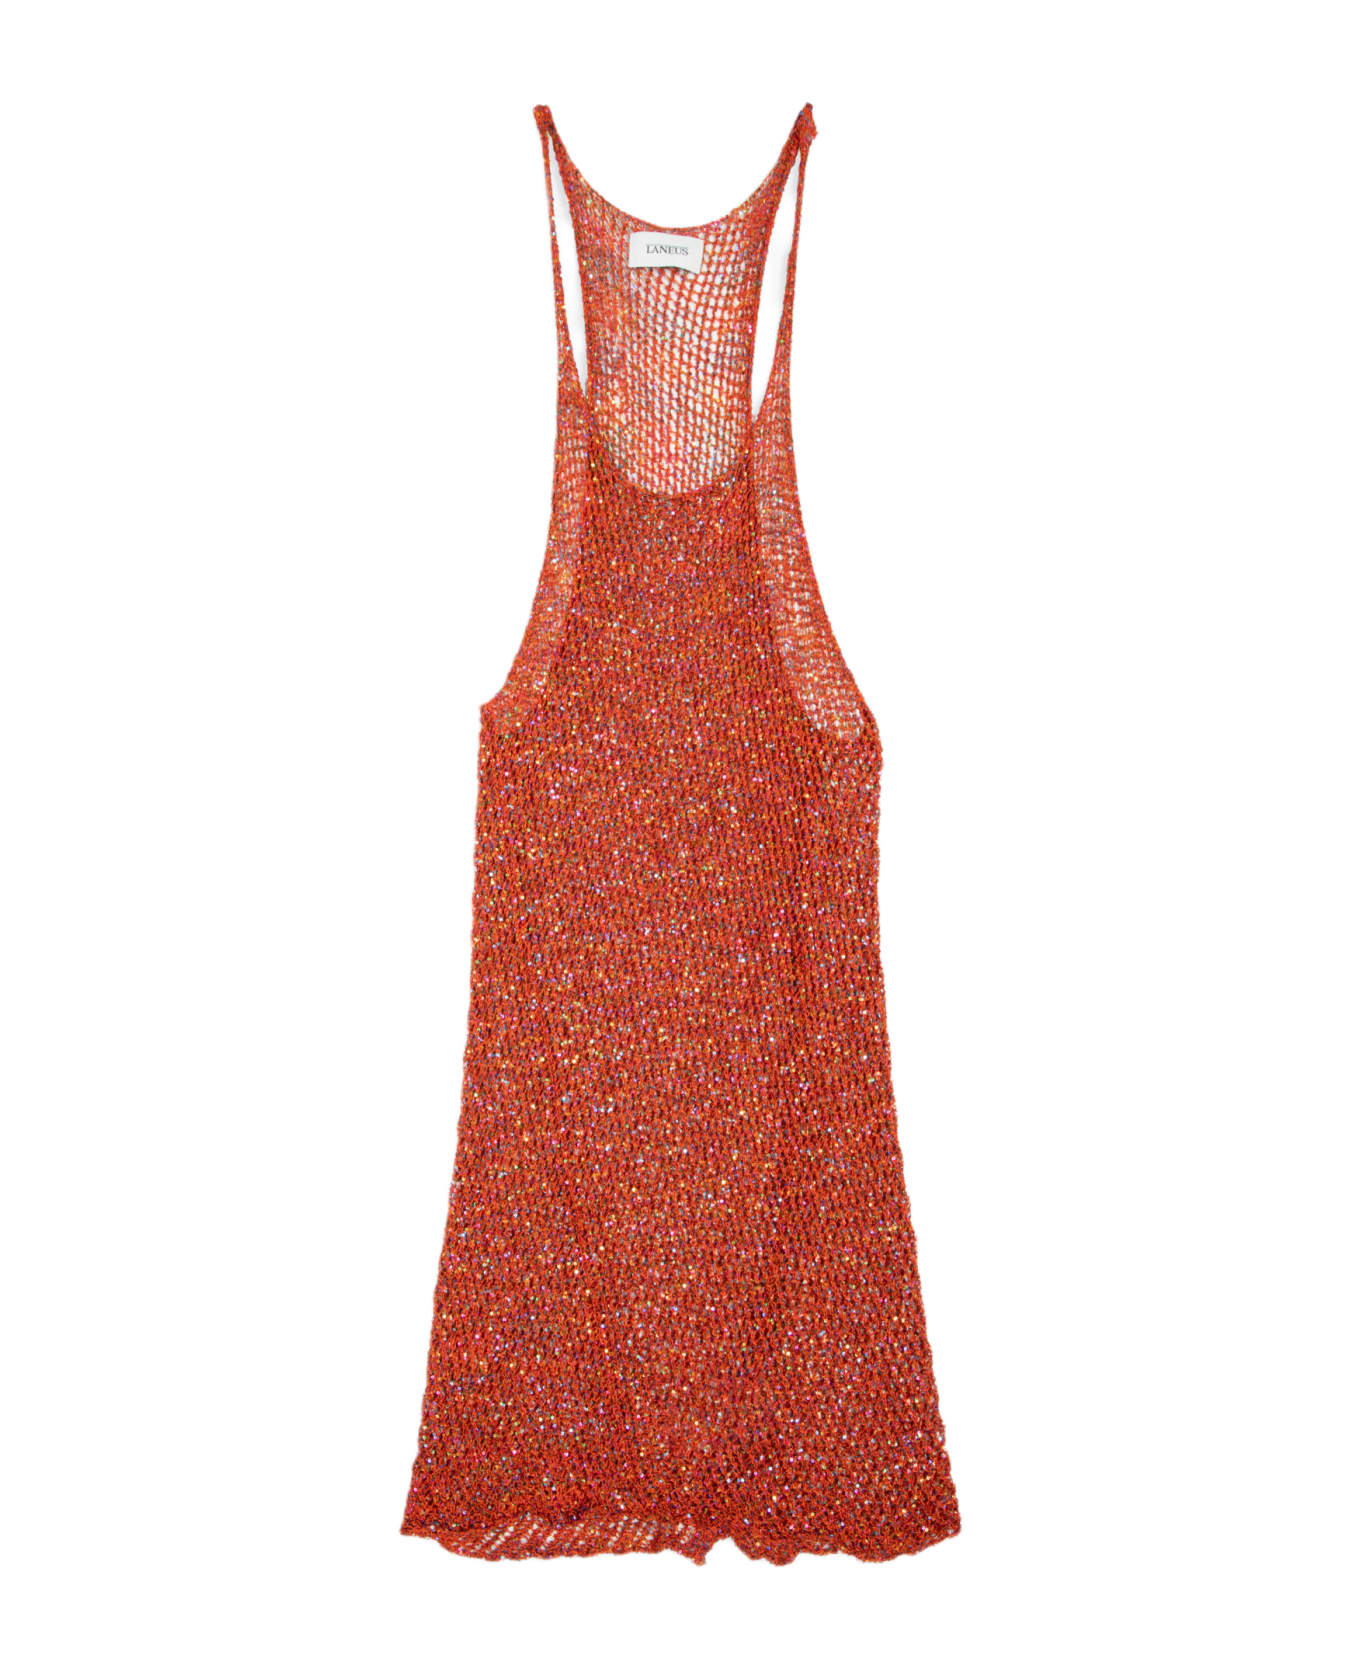 Laneus Pailletes Tank Woman Orange net knitted short dress with sequins - Corallo タンクトップ